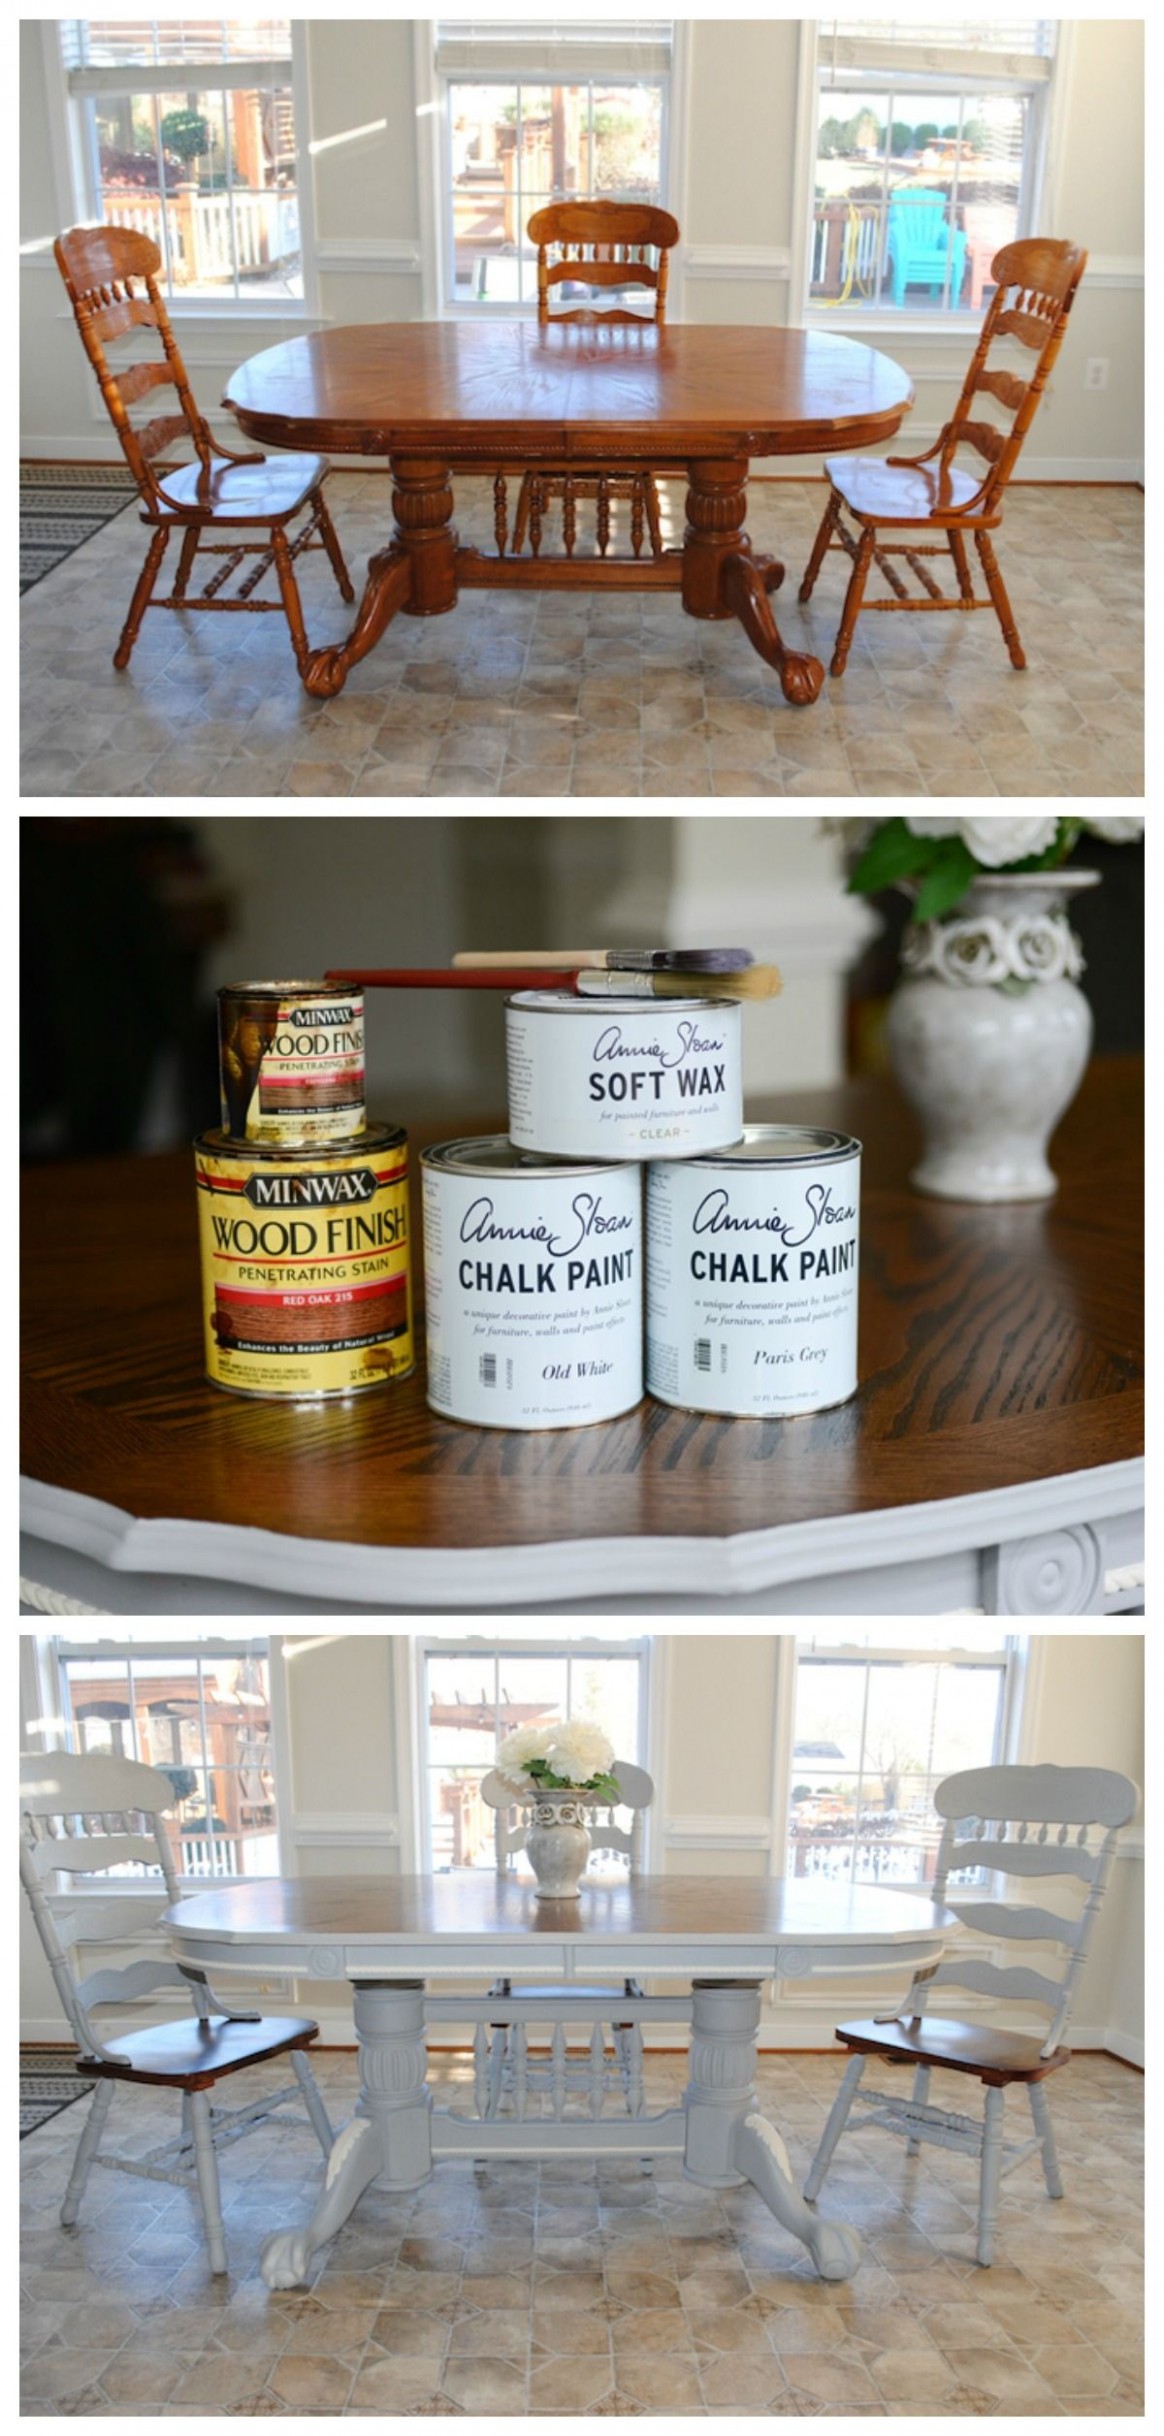 Before And After Dining Room Table Makeover With Annie Sloan Chalk ..